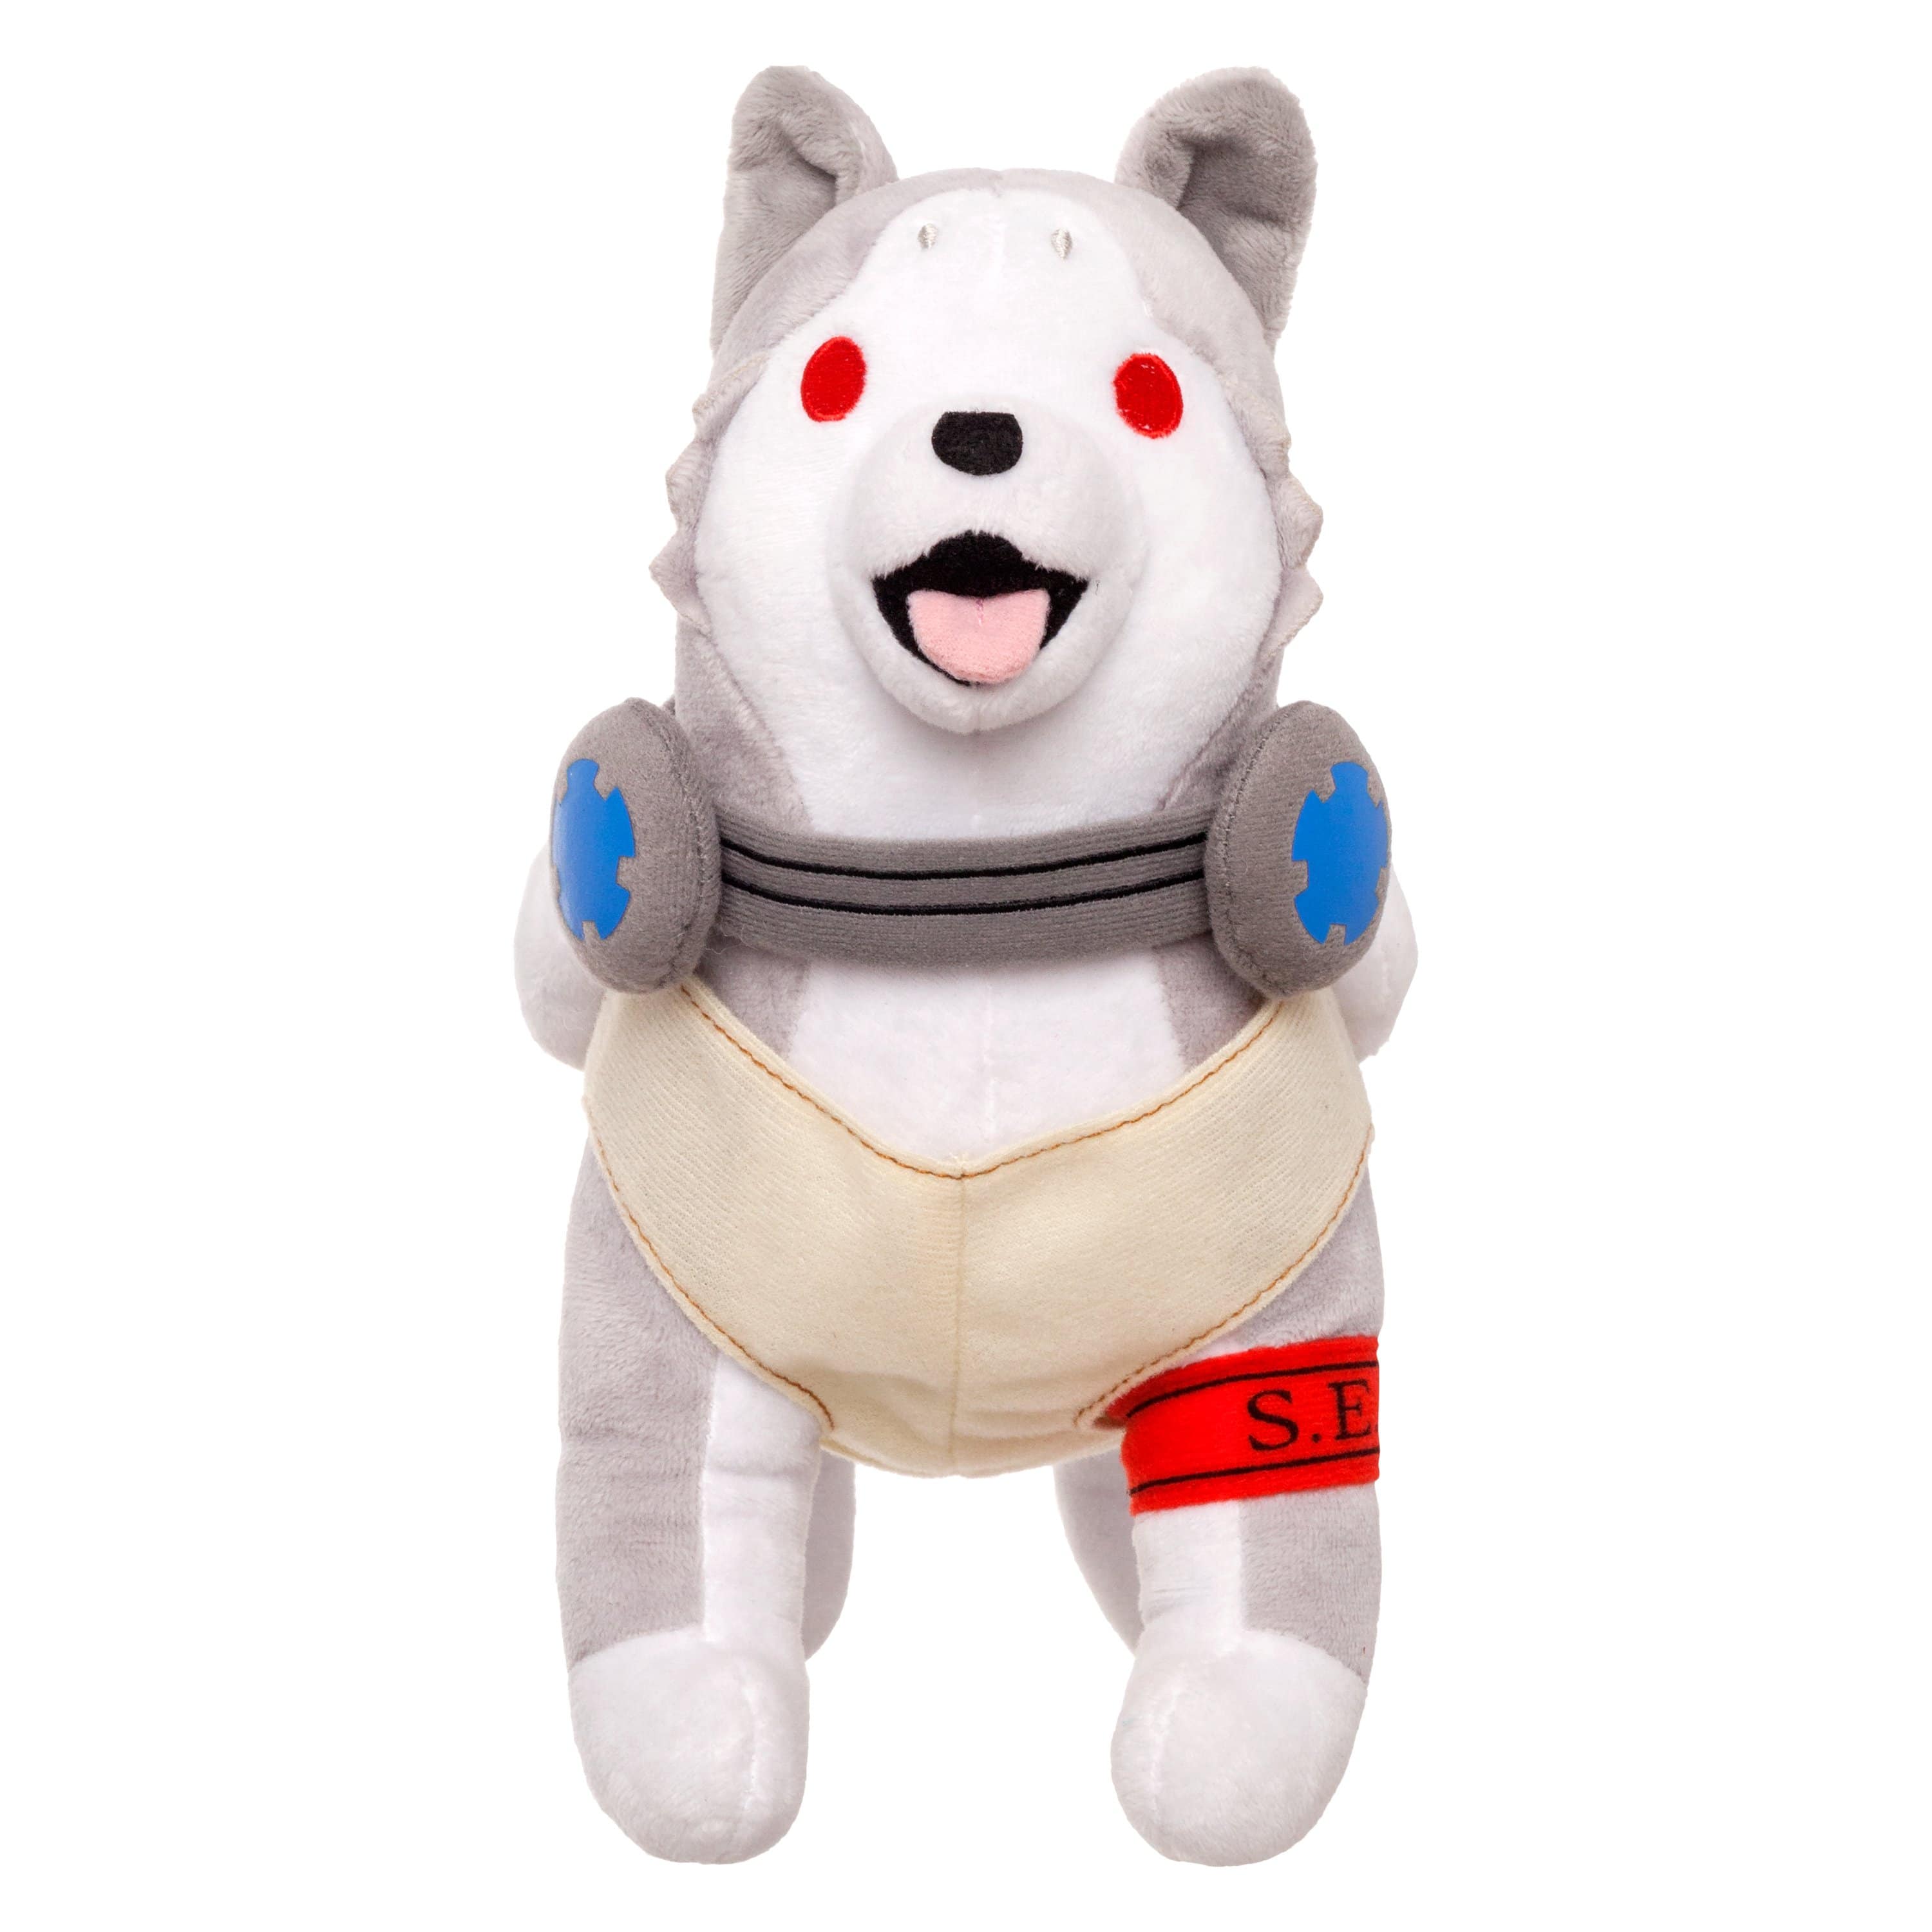 Persona 3 - 9" Koromaru Collector's Plush Stuffed Toy Front View